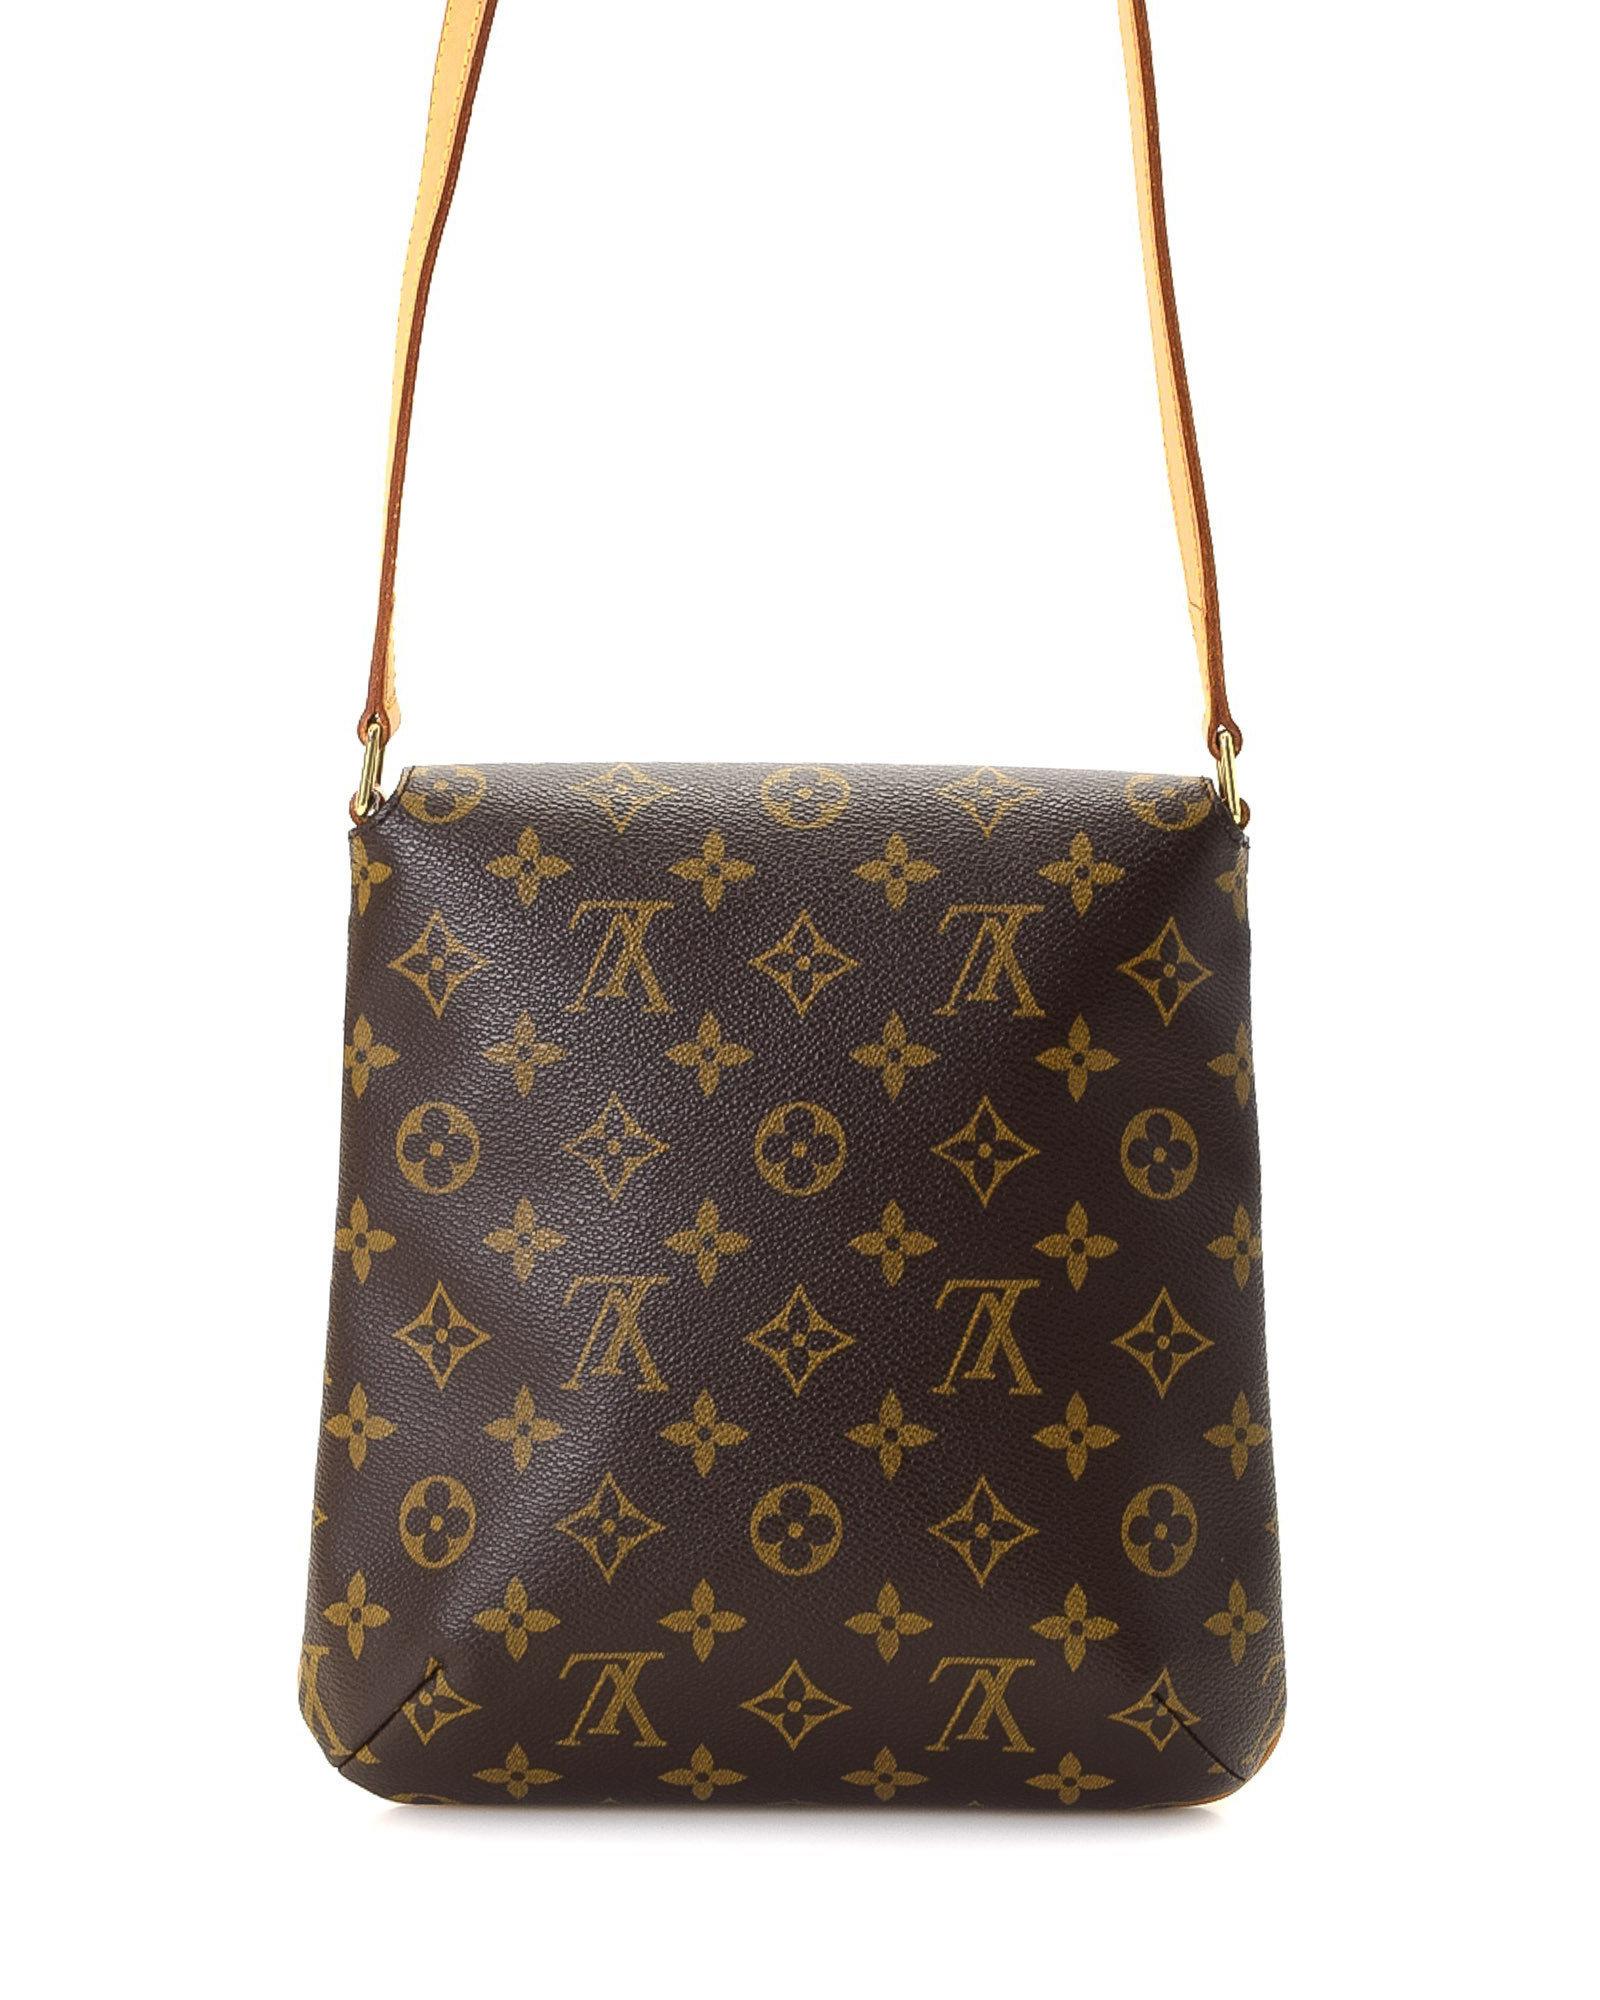 Lv Sling Purse  Natural Resource Department